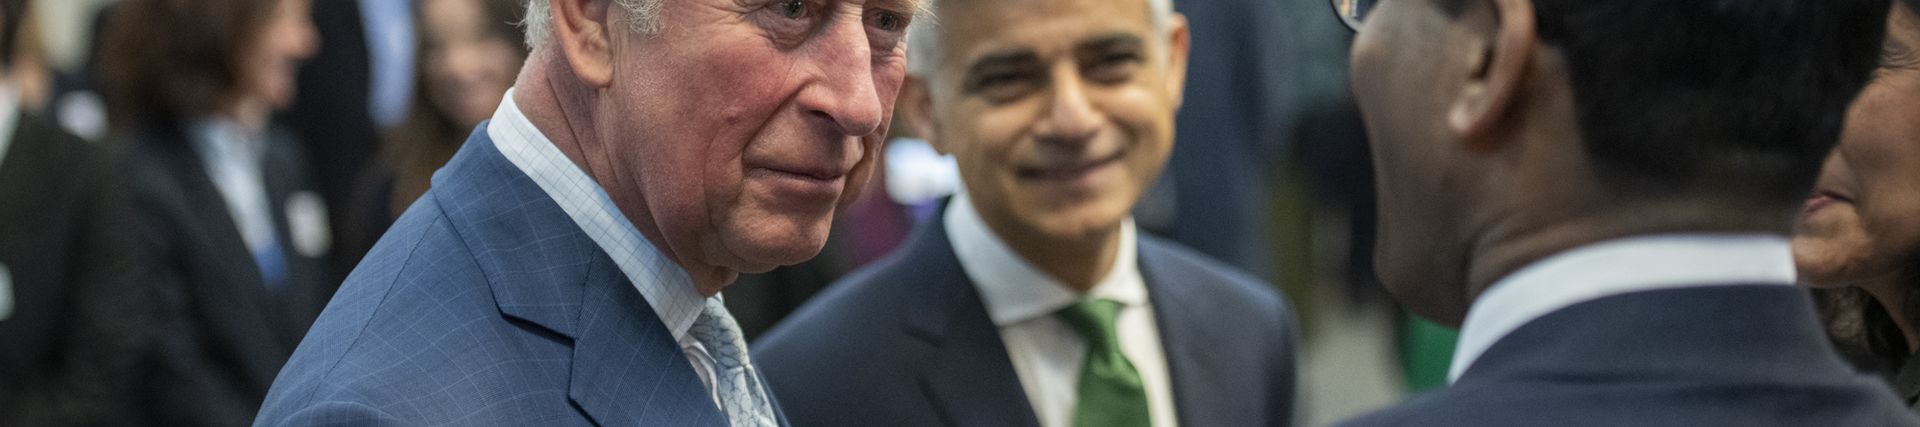 TfL20 The Prince of Wales meets staff with the Mayor of London Sadiq Khan [TfL press images Flickr]